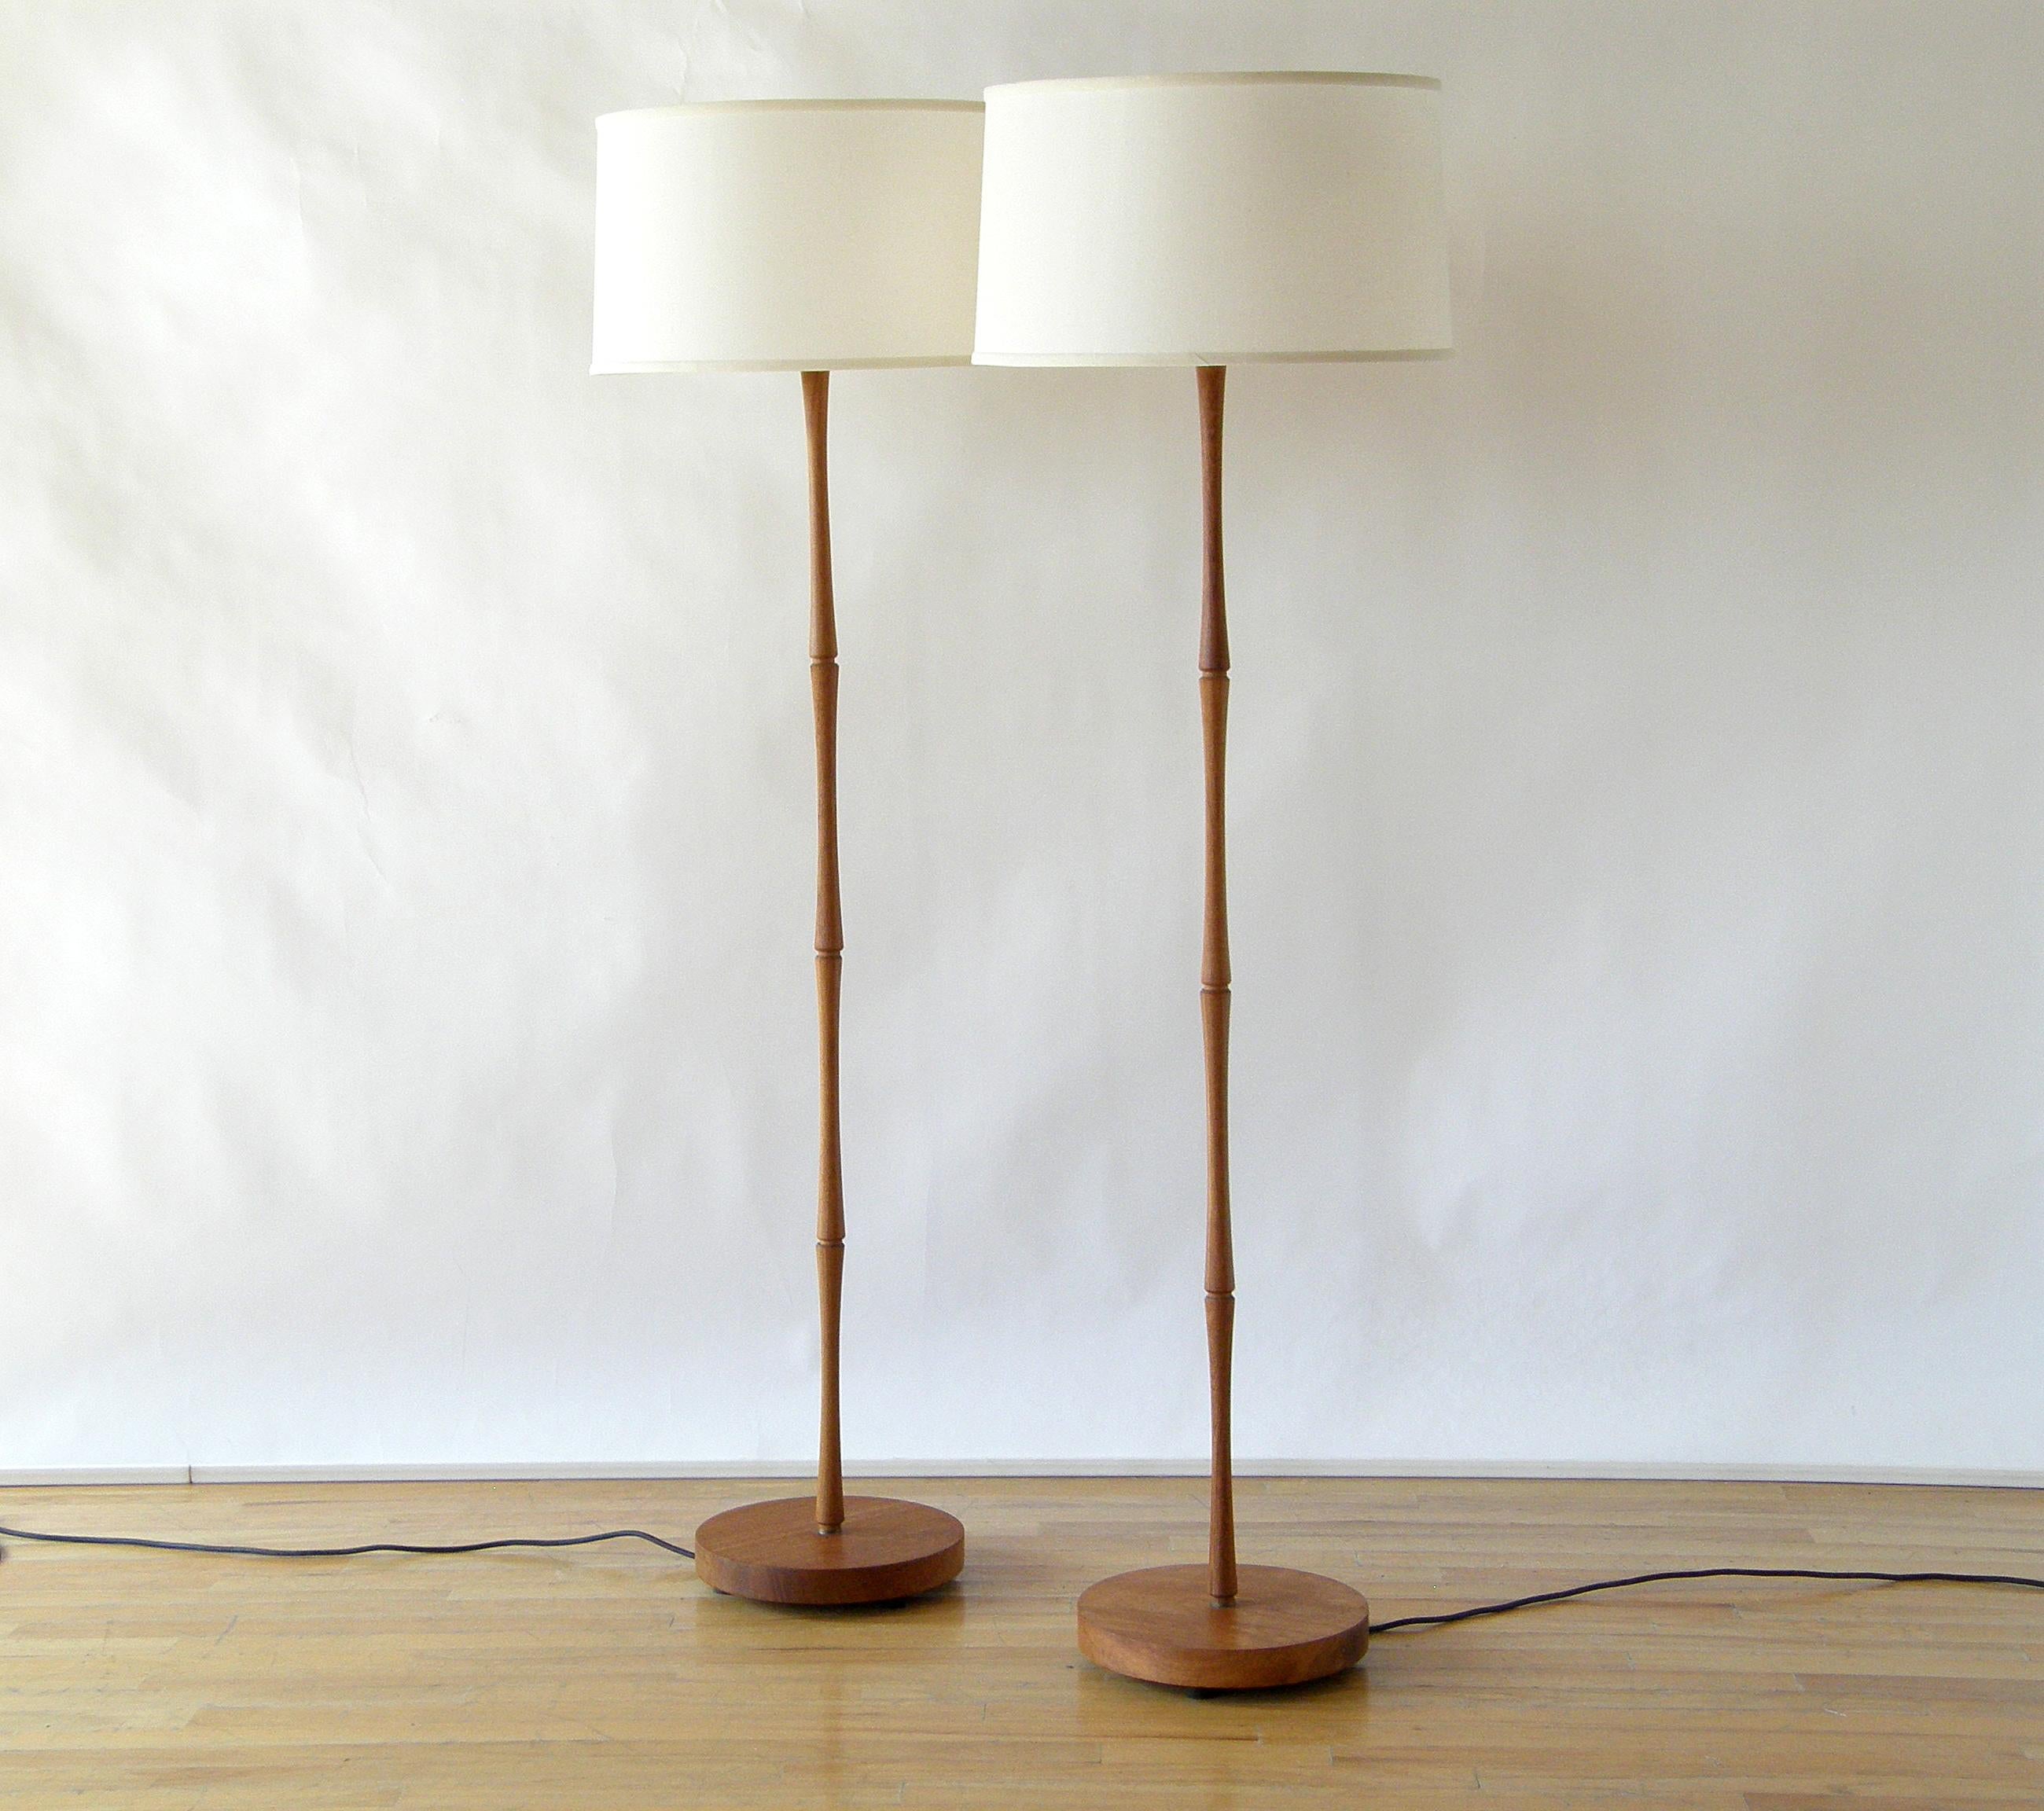 This pair of teak floor lamps have a stylized faux bamboo design to their stems. The segments are finely turned with an elegant hourglass shape representing the internodes of a bamboo stem. There are notched points between their flared ends,